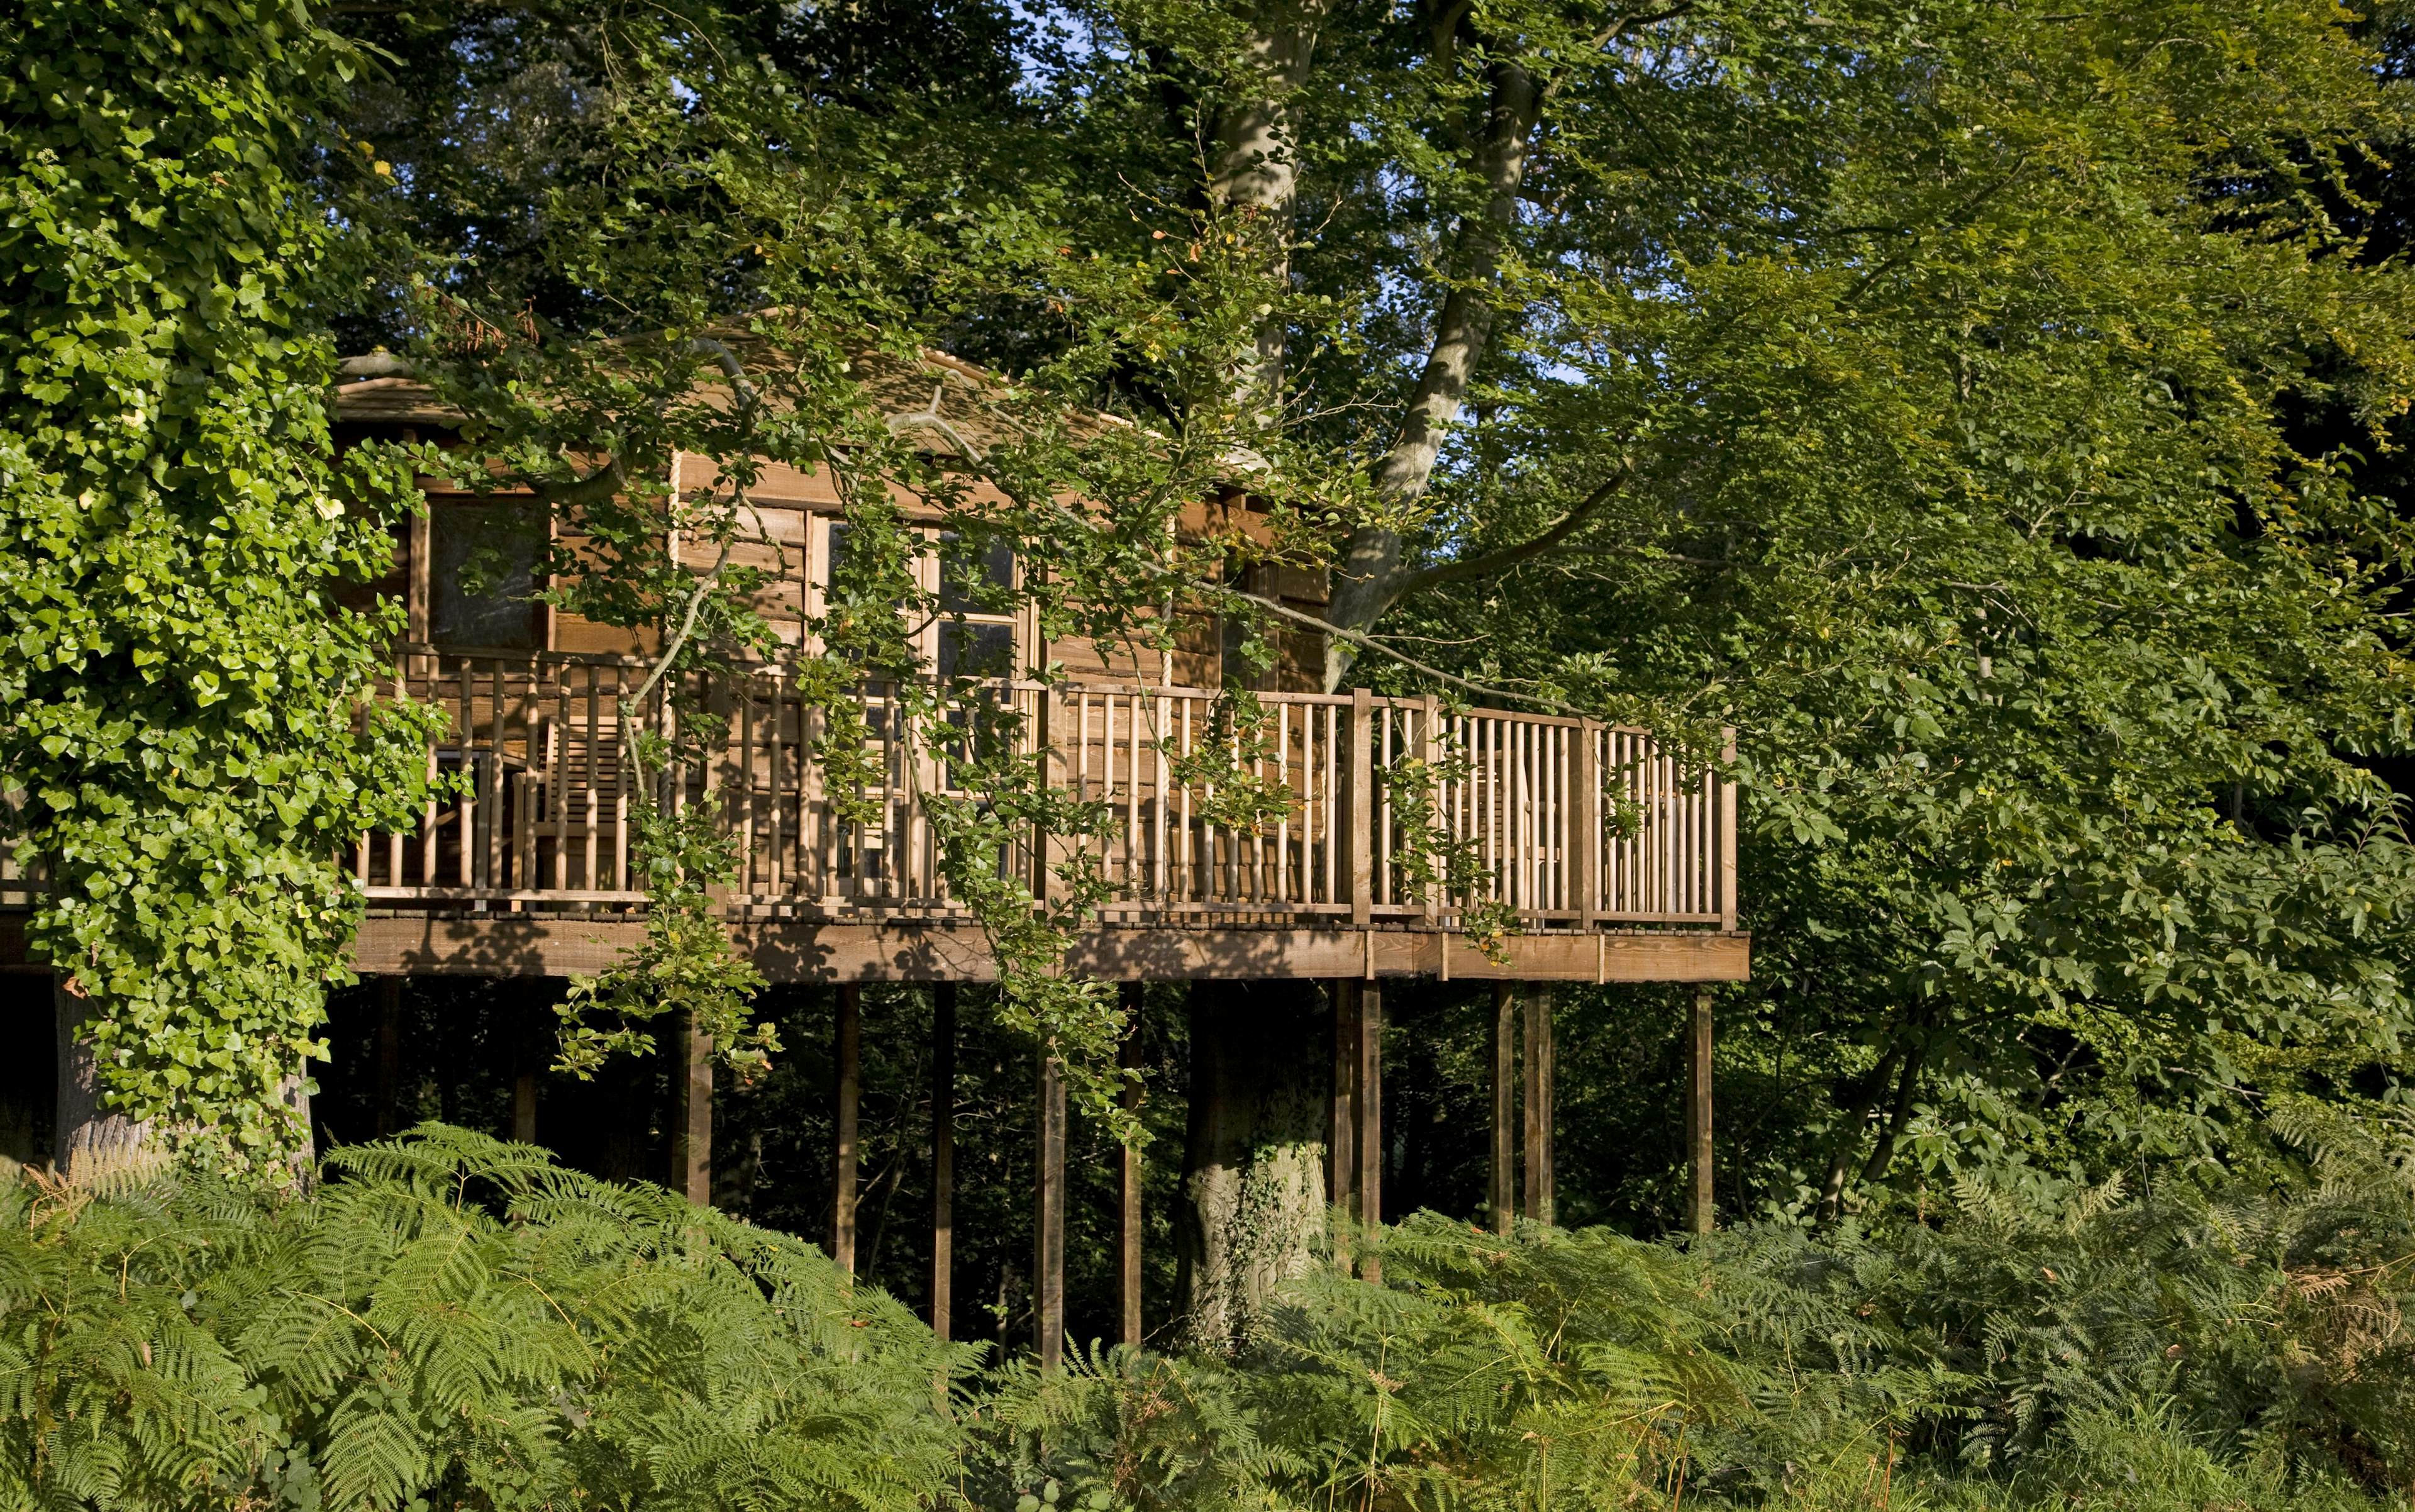 New Place Hotel - Hampshire - The Treehouse image 1